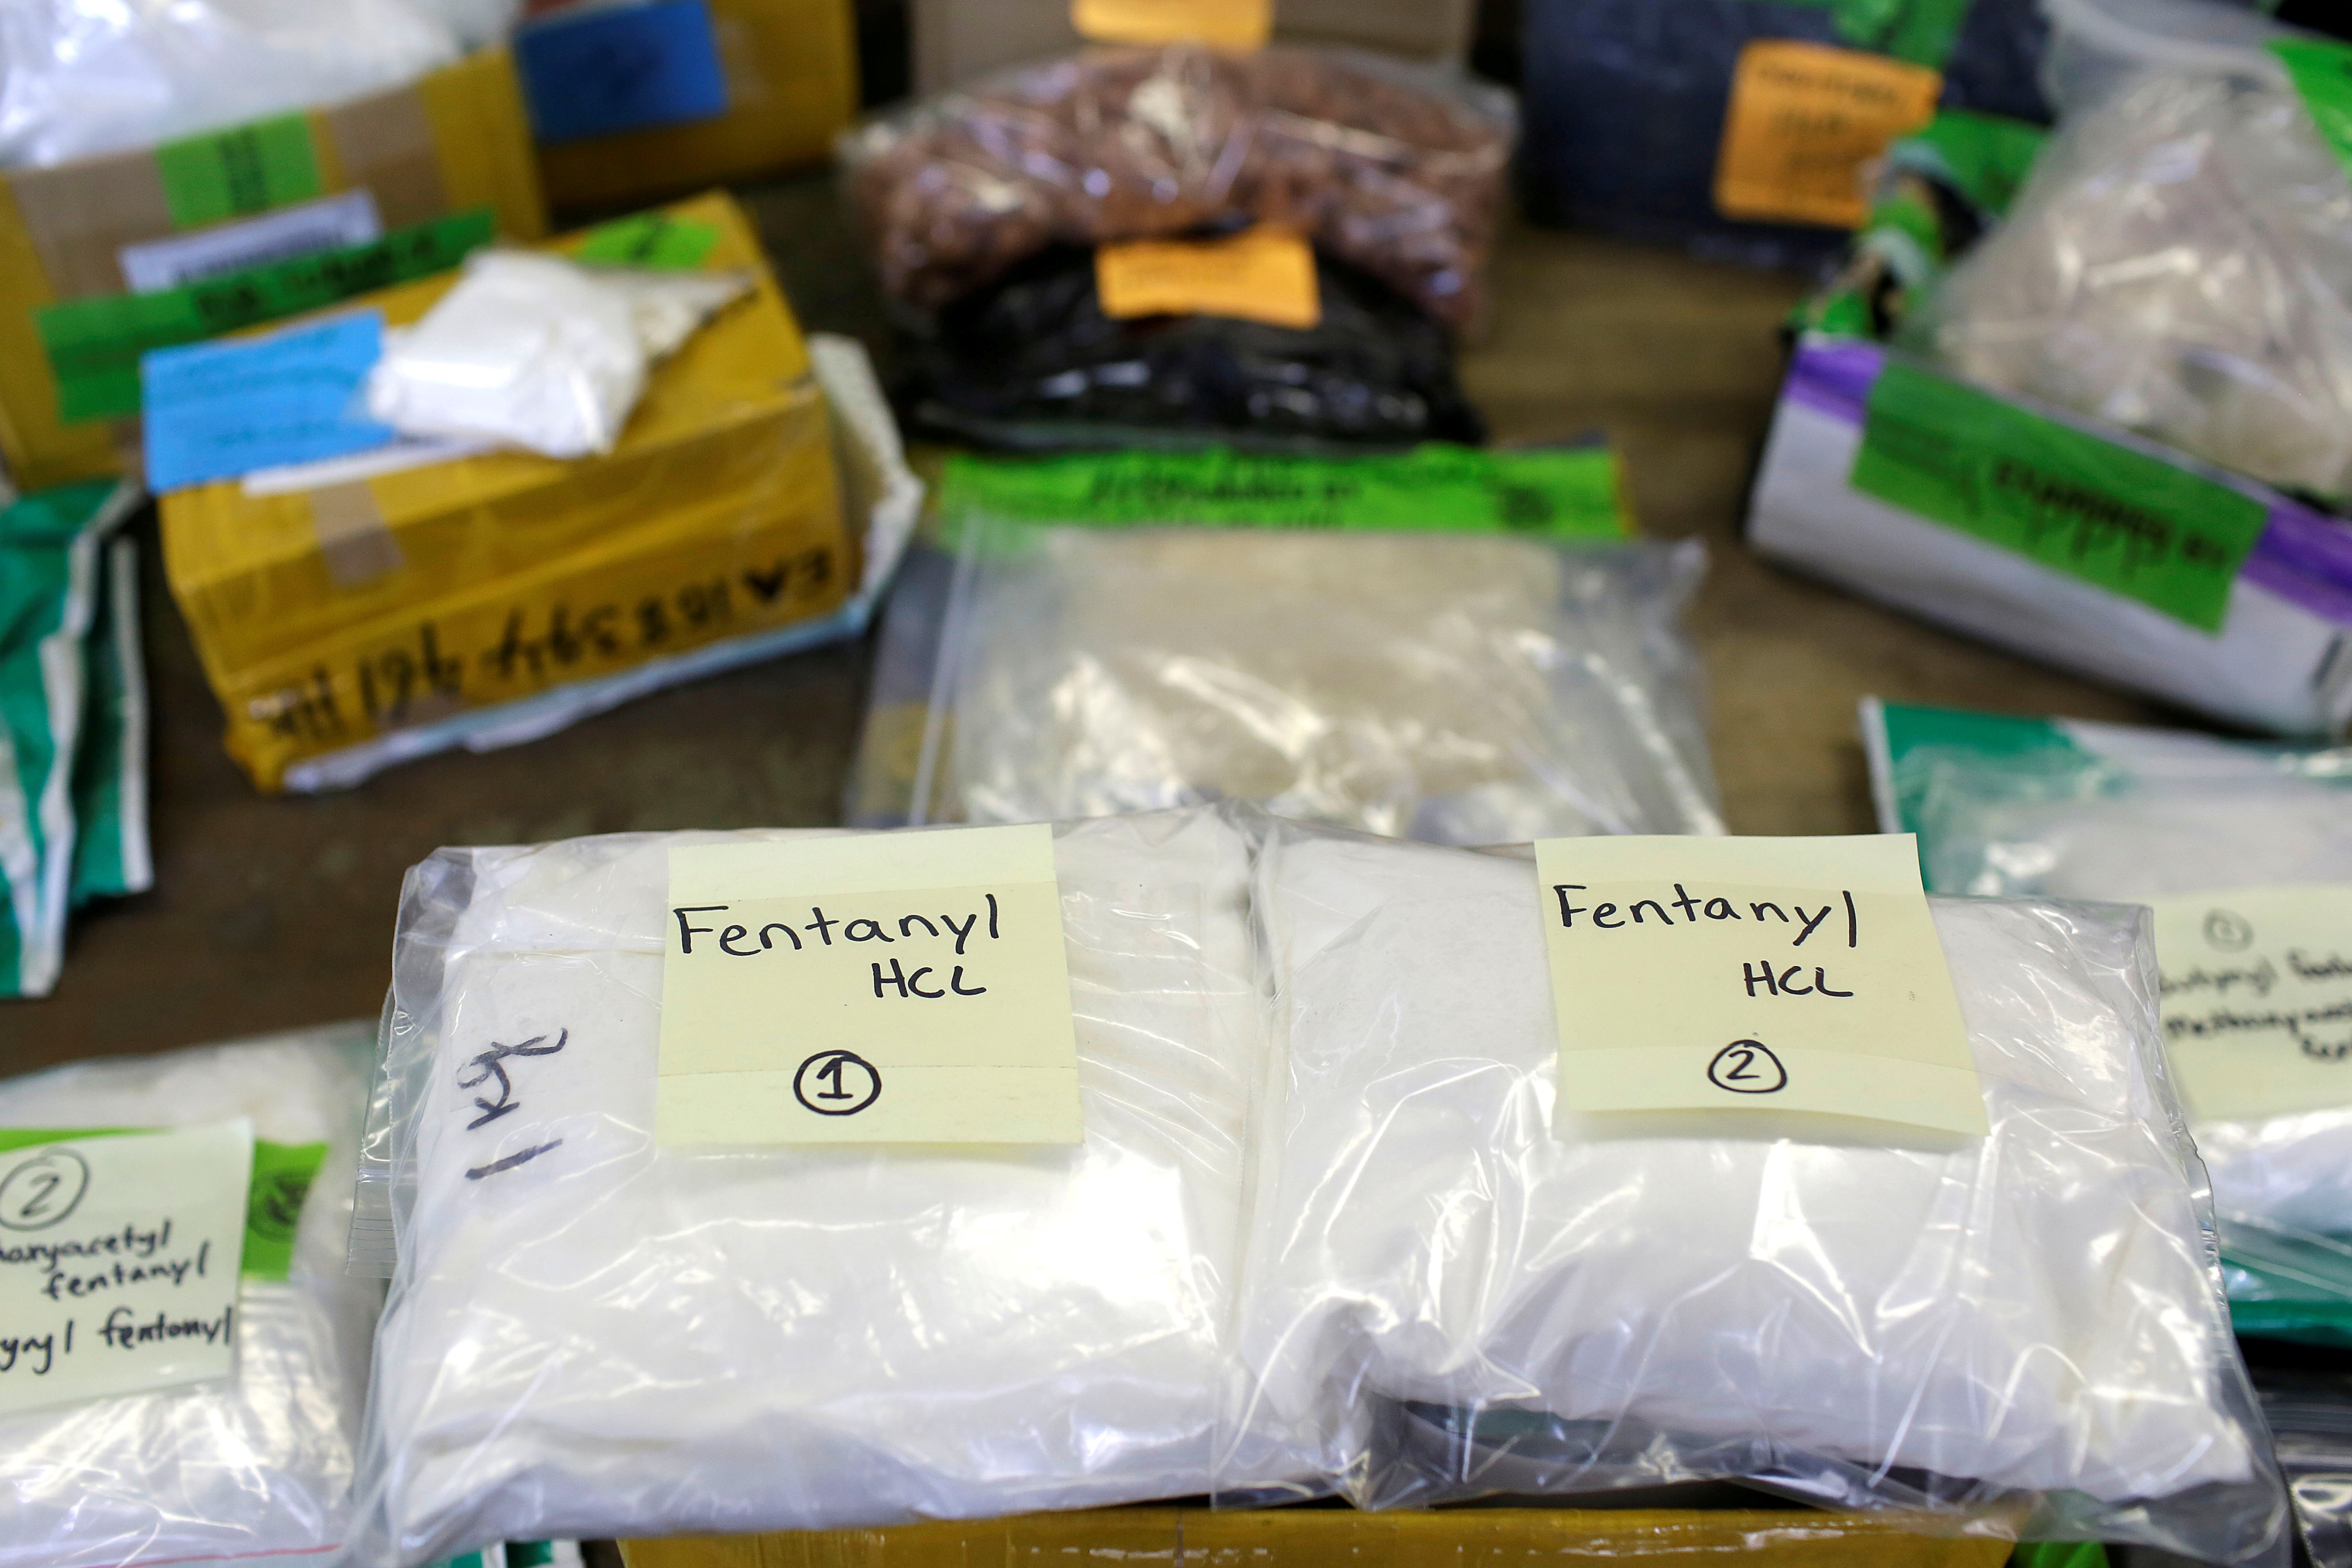 Washington has accused China of supplying an illicit flow of the precursor chemicals used to make fentanyl, which has fuelled a health crisis in the US. Photo: Reuters